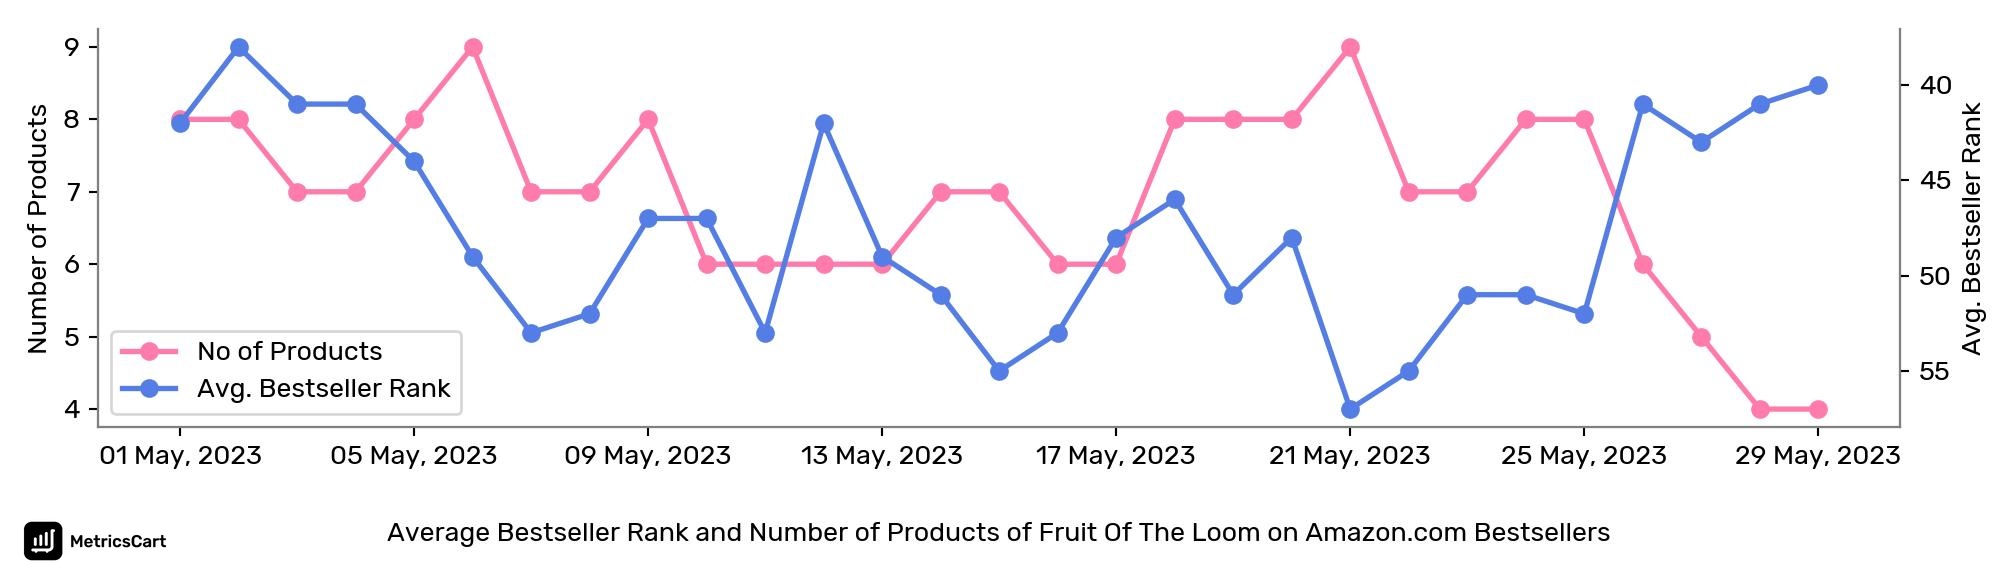 Average Bestseller Rank and Number of Products of Fruit Of The Loom on Amazon.com Bestsellers